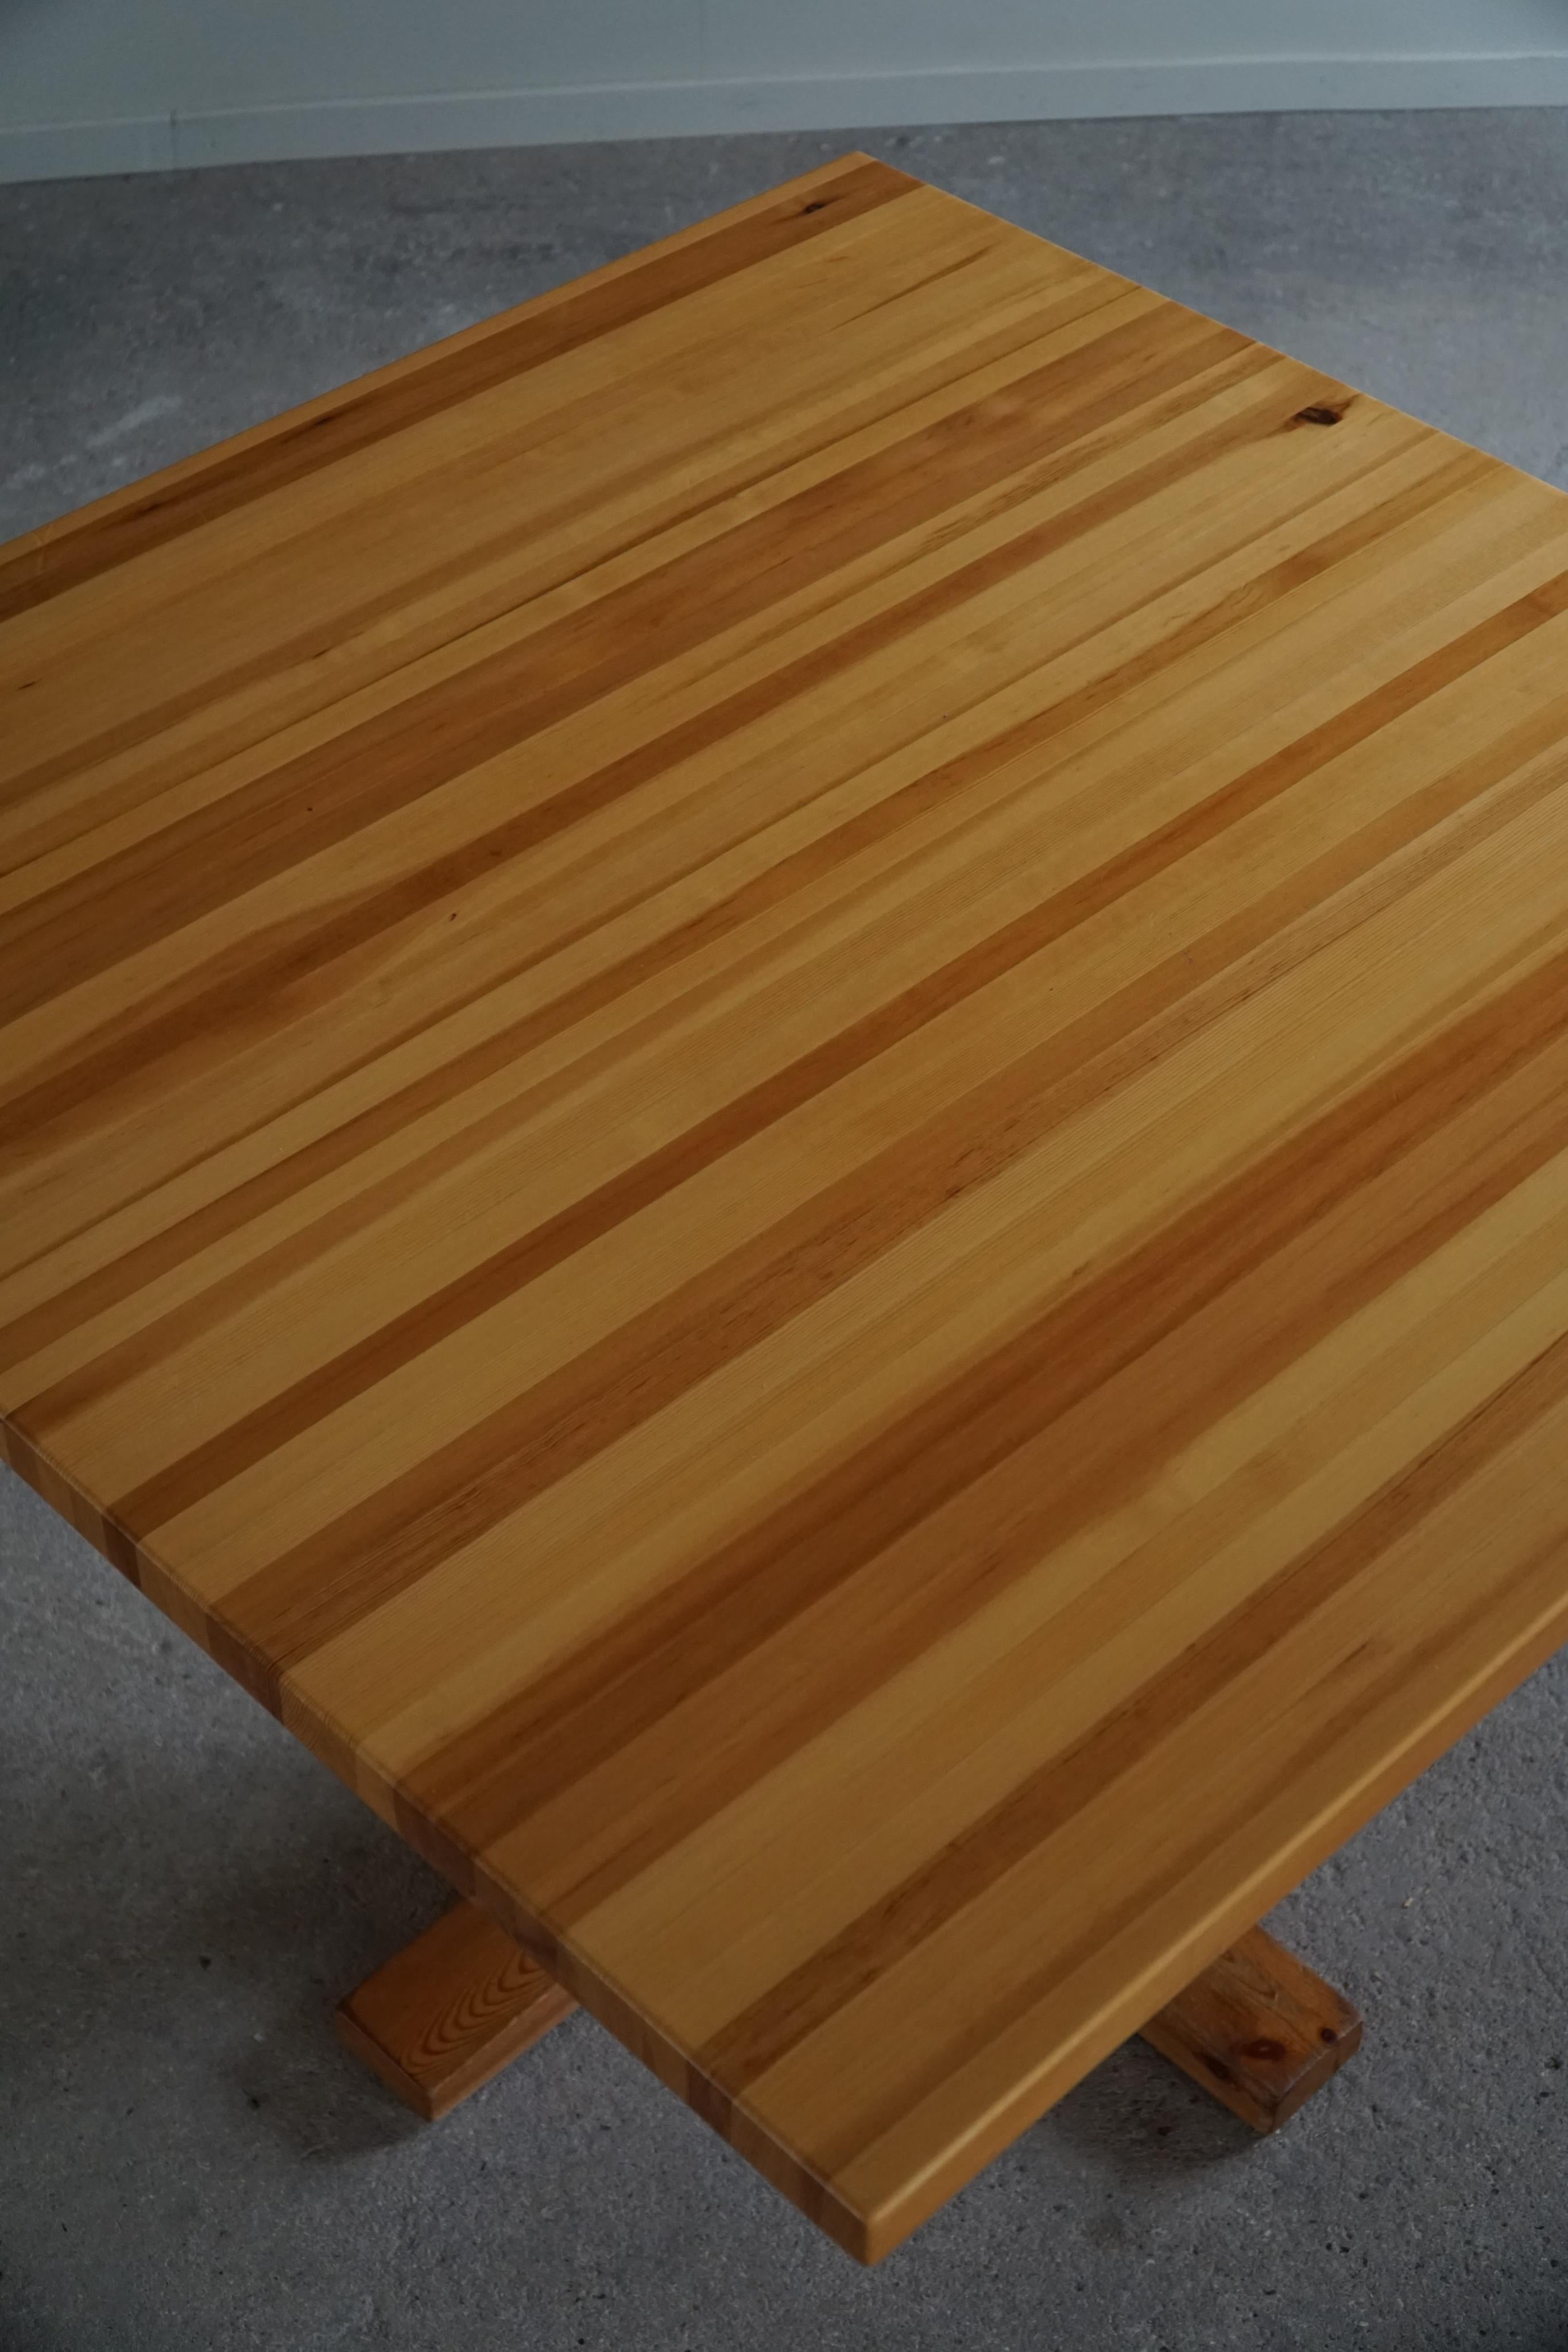 Midcentury Square Dining Room Table in Pine, Danish Cabinetmaker, 1970s For Sale 4